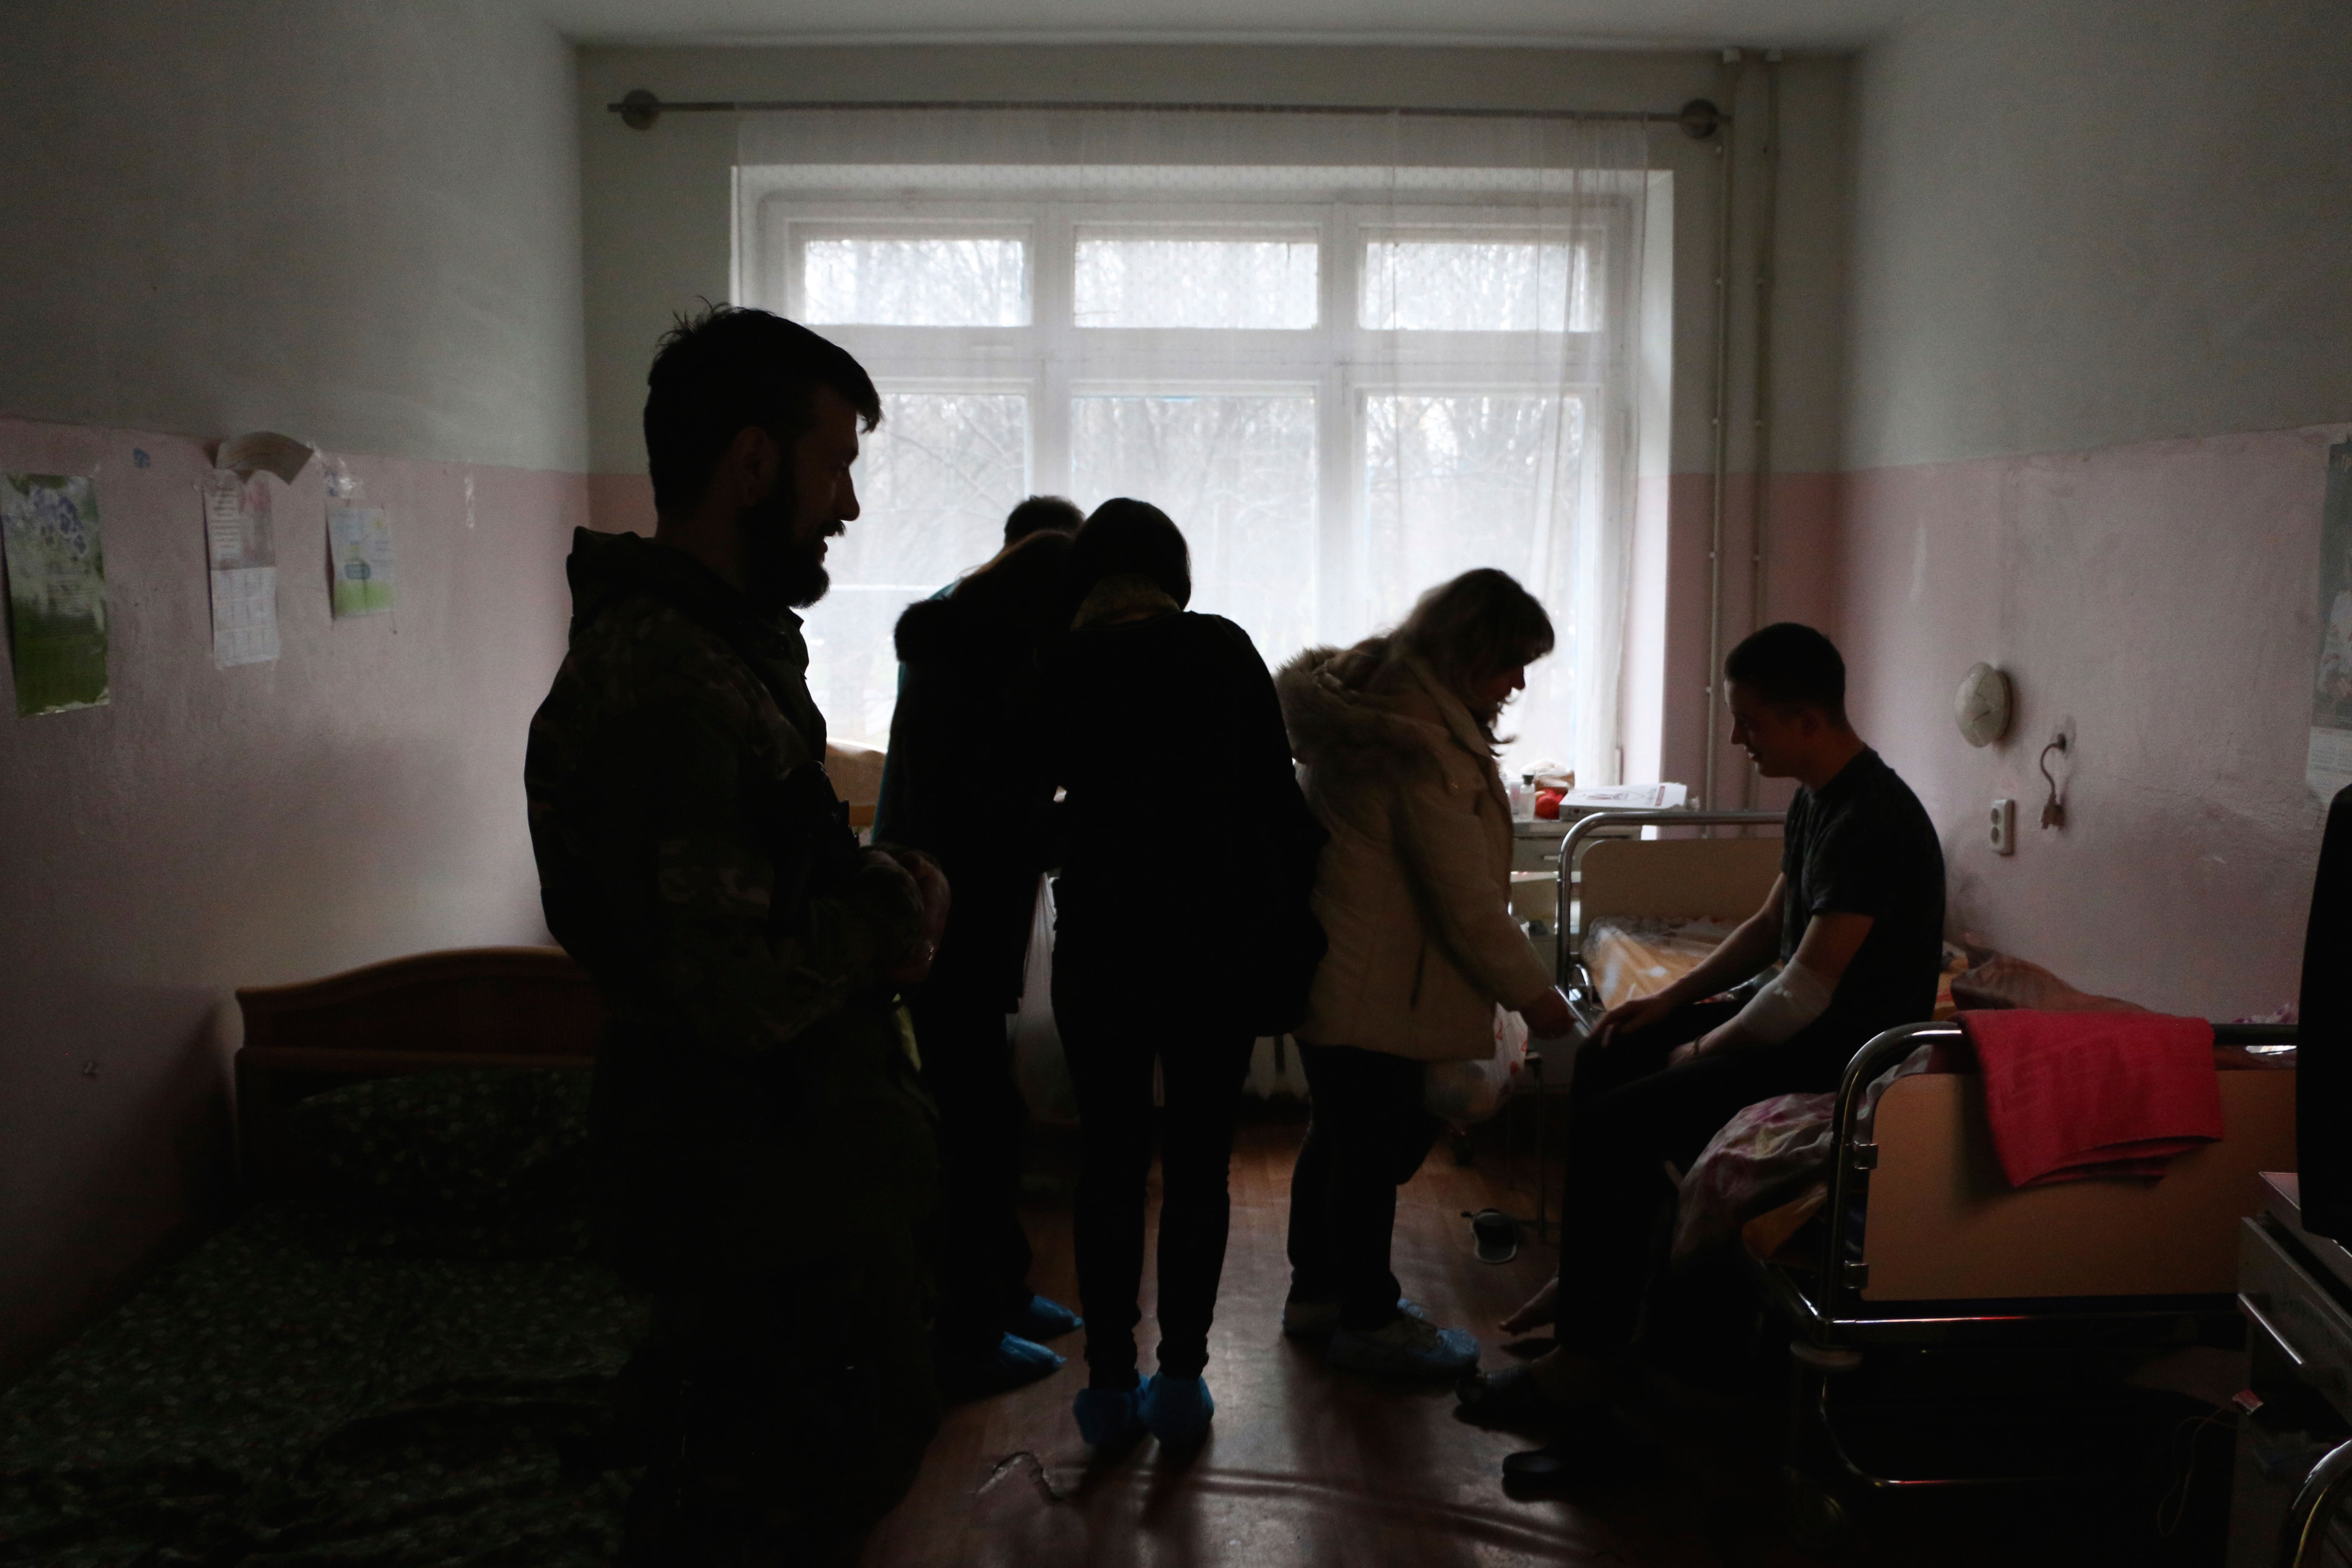 Ukrainian women deliver supplies to wounded soldiers at a hospital in Mariupol.